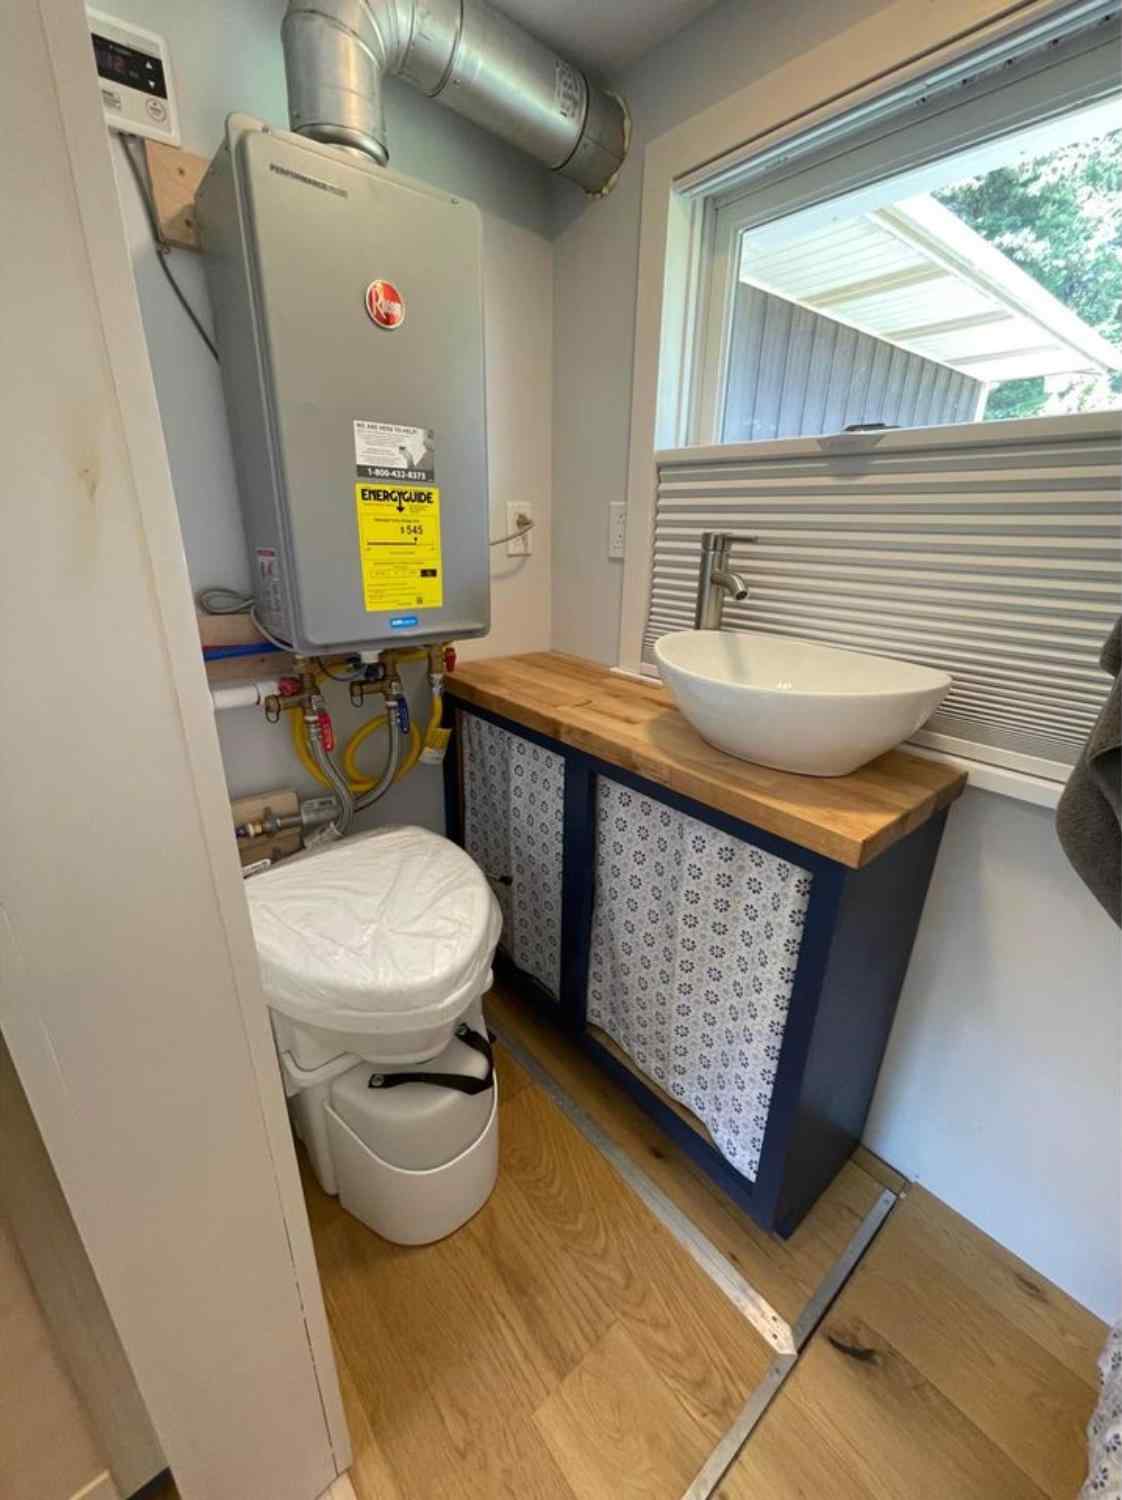 bathroom of fully offgrid home has a composting toilet 